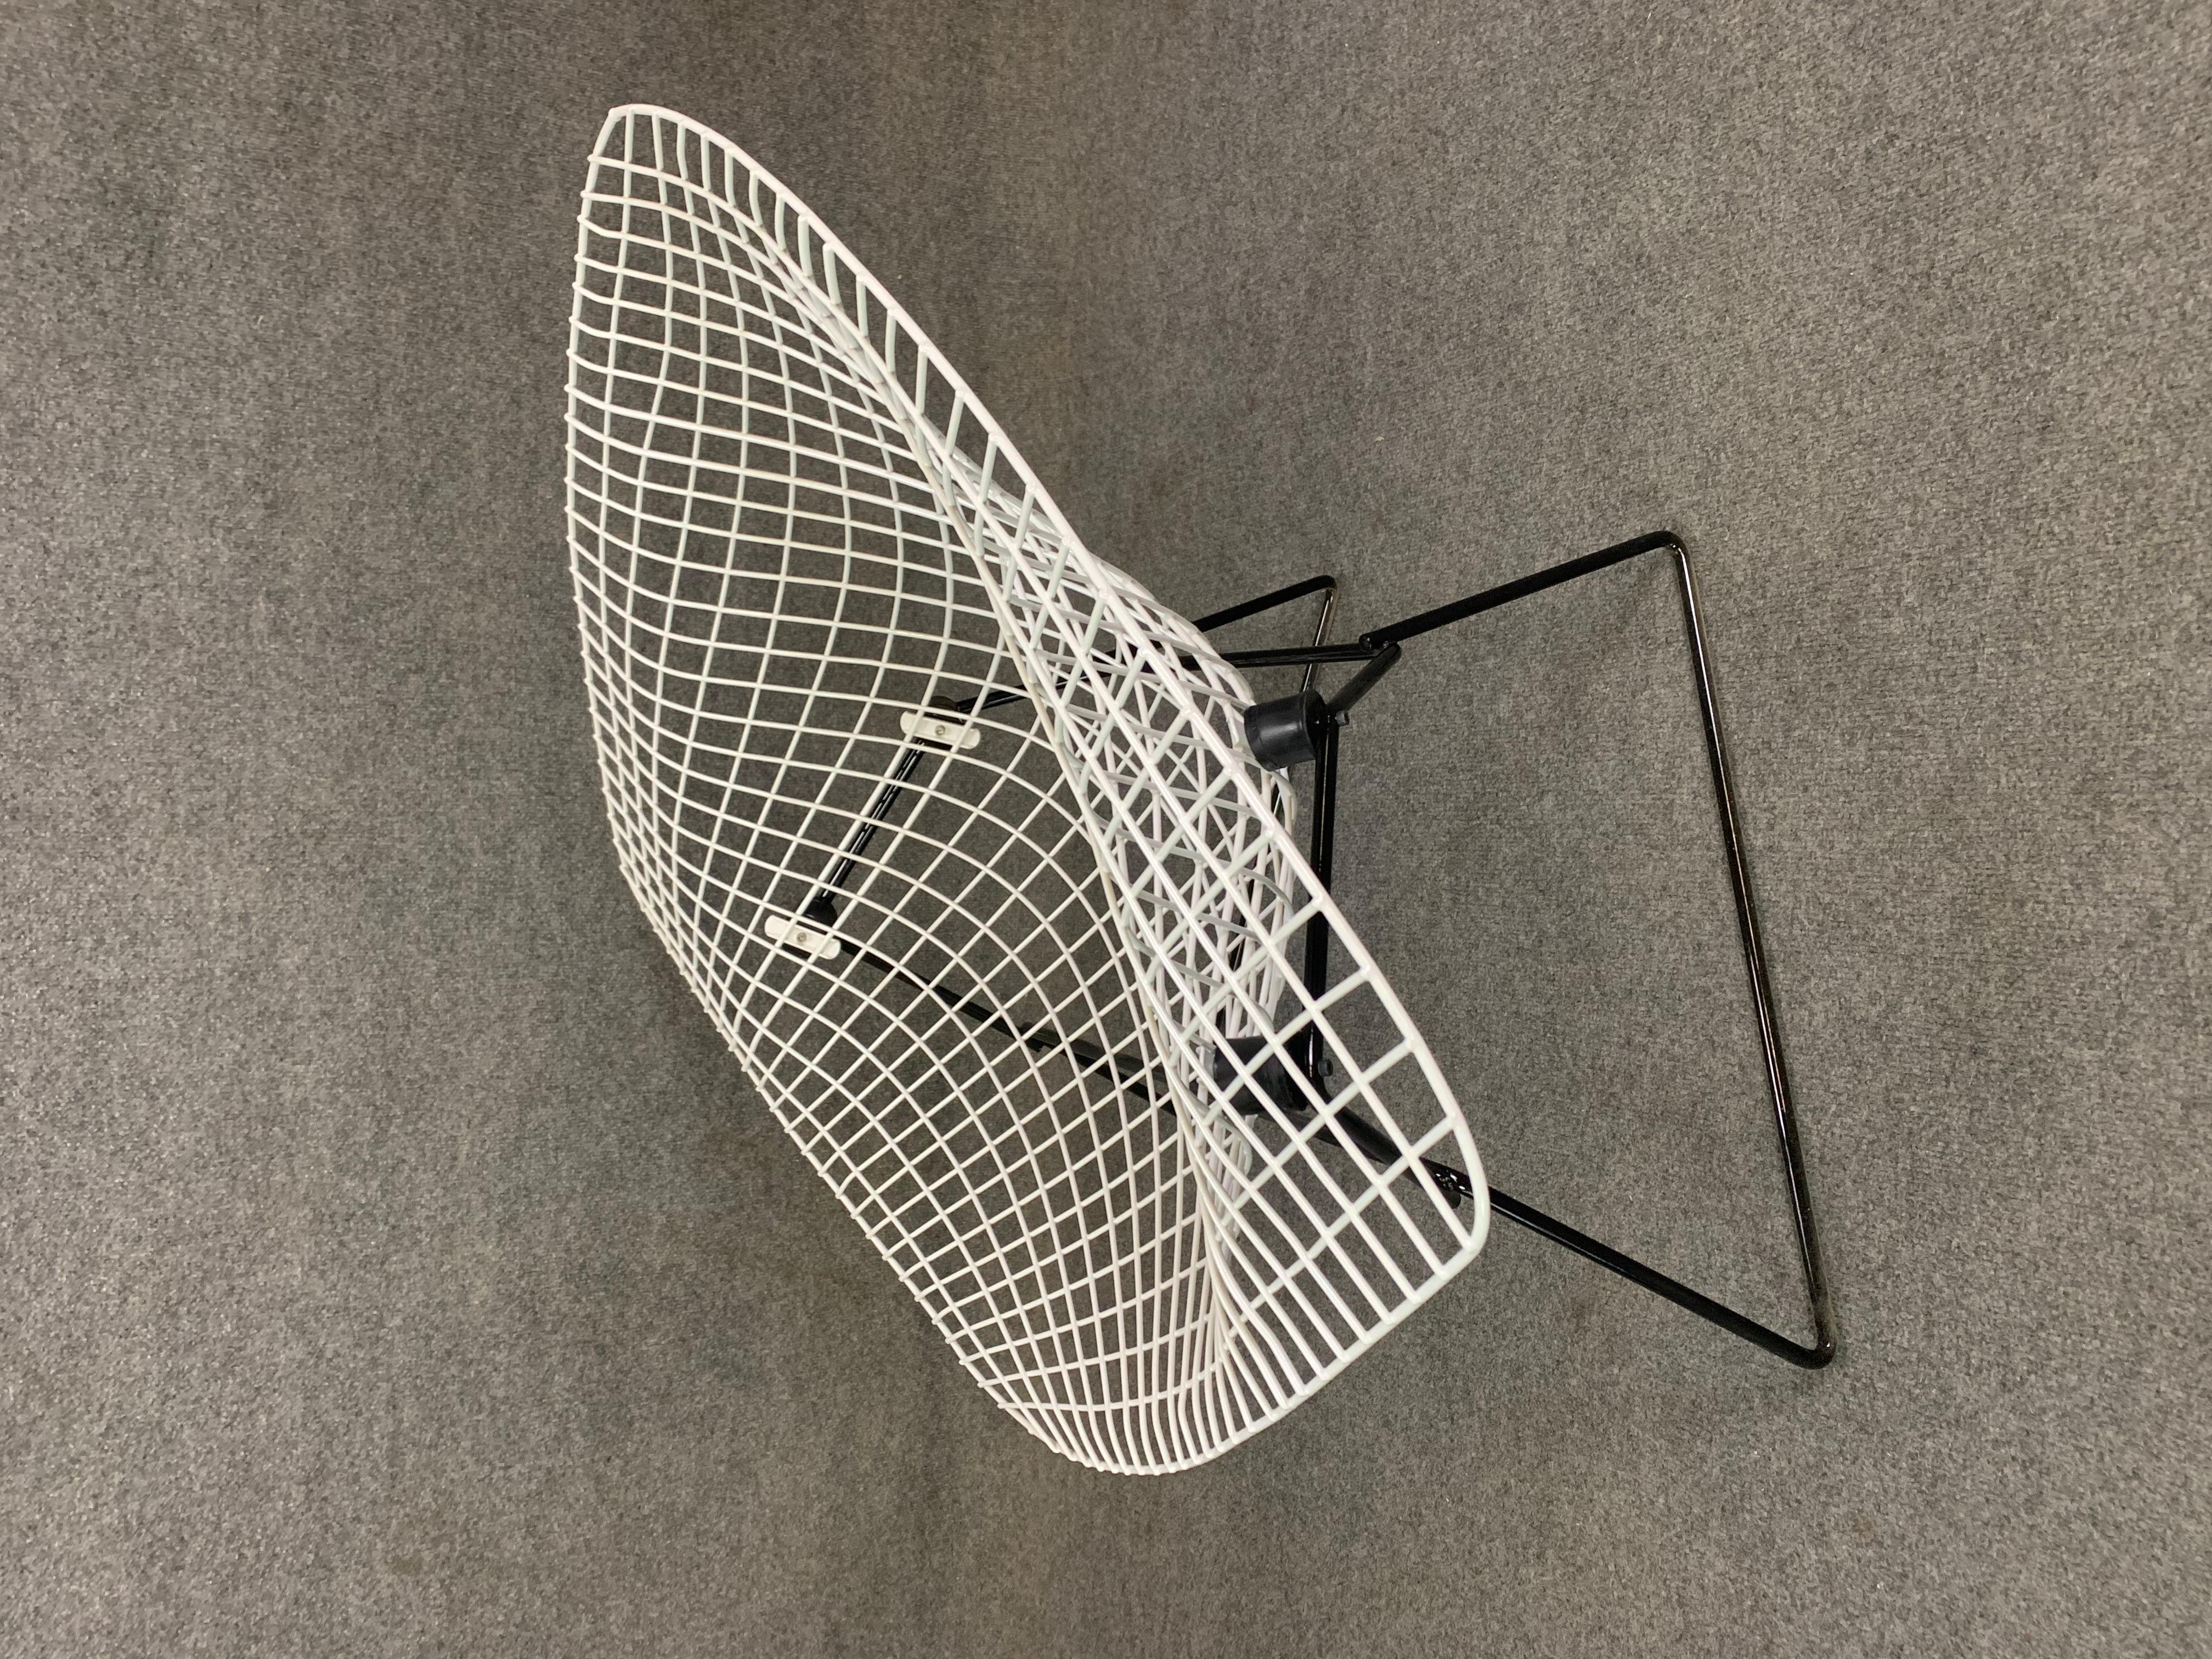 Mid-20th Century Vintage Mid-Century Modern Large Diamond Chair by Harry Bertoia for Knoll